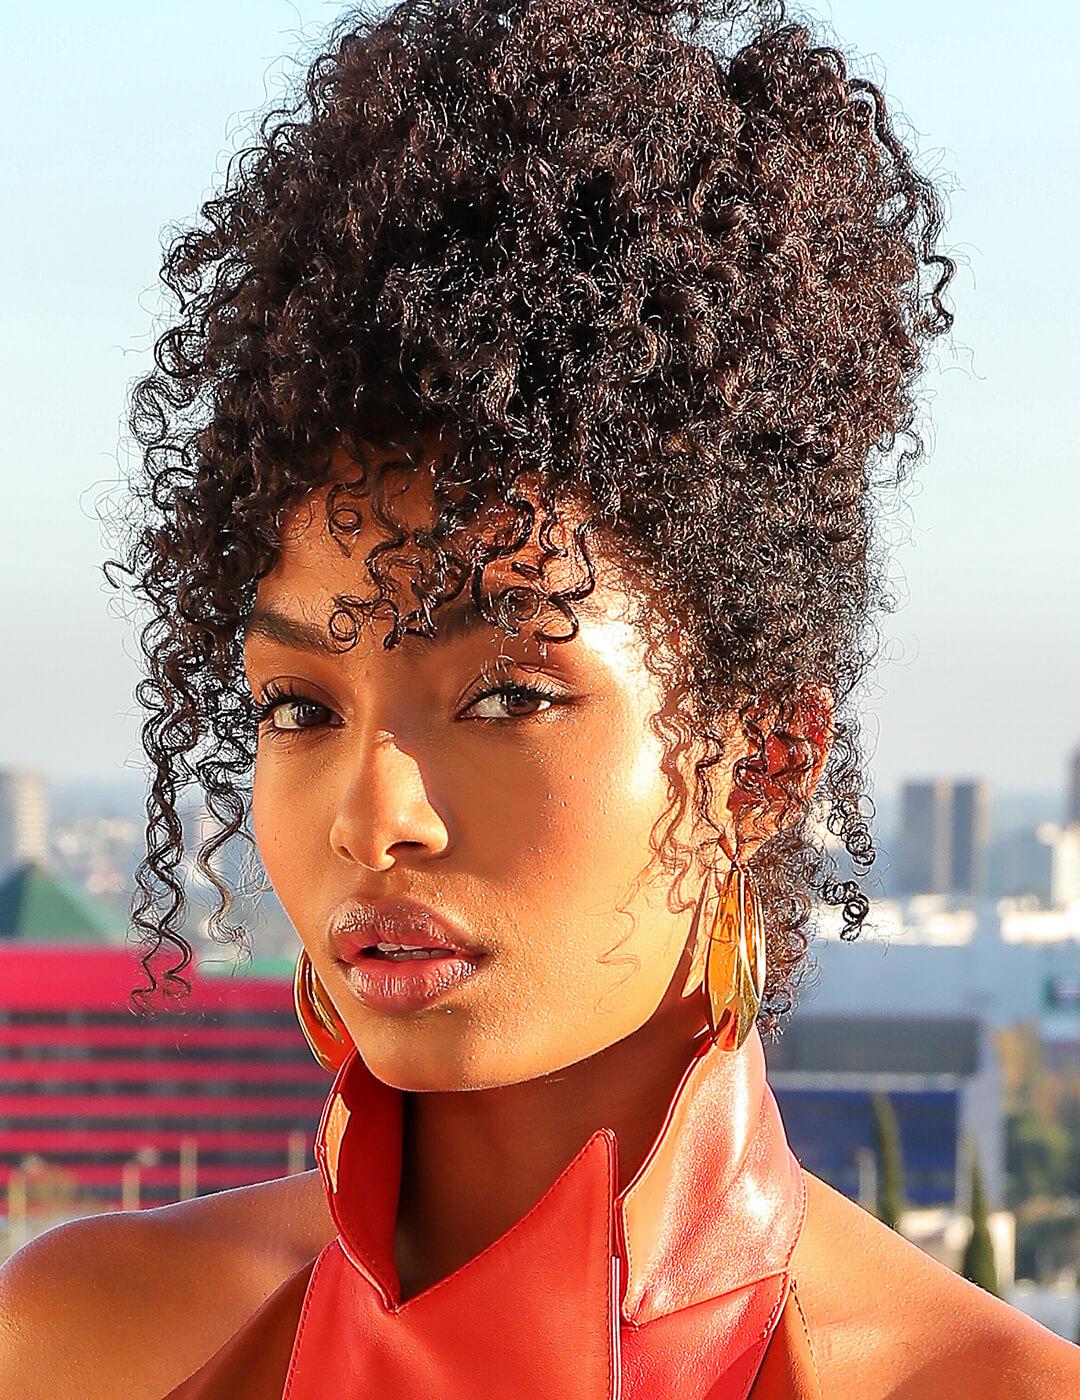 Yara Shahidi rocking a curly updo hairstyle during golden hour